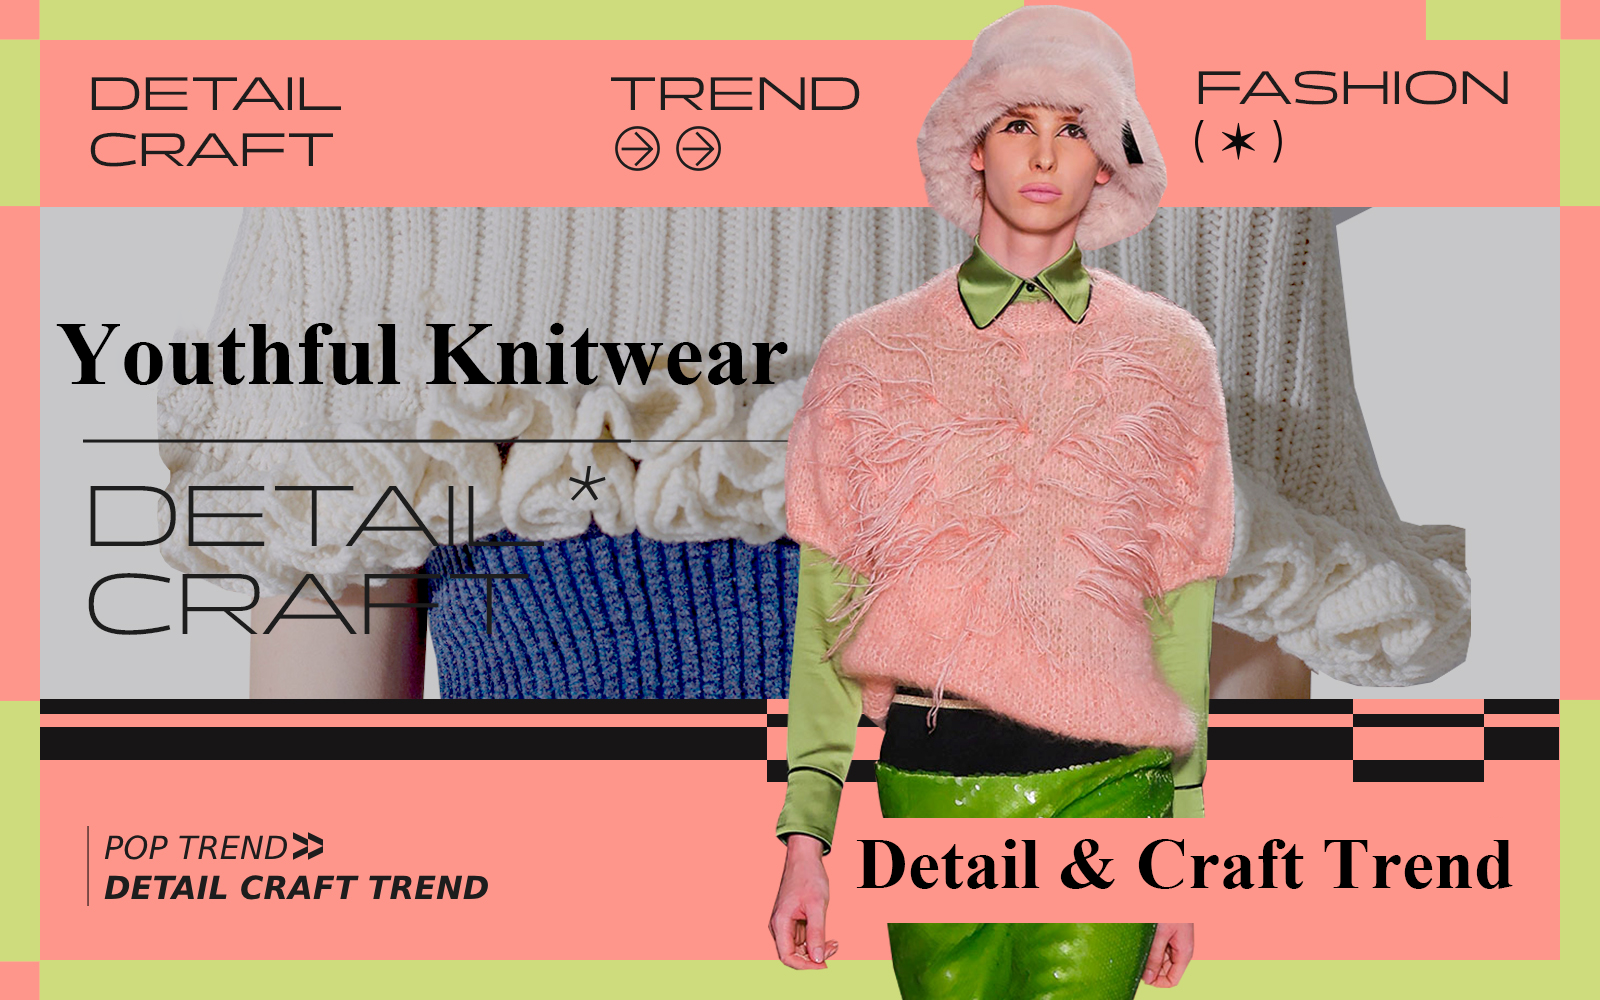 Multidimensional Fusion -- A/W 25/26 Detail & Craft Trend for Women's Knitwear